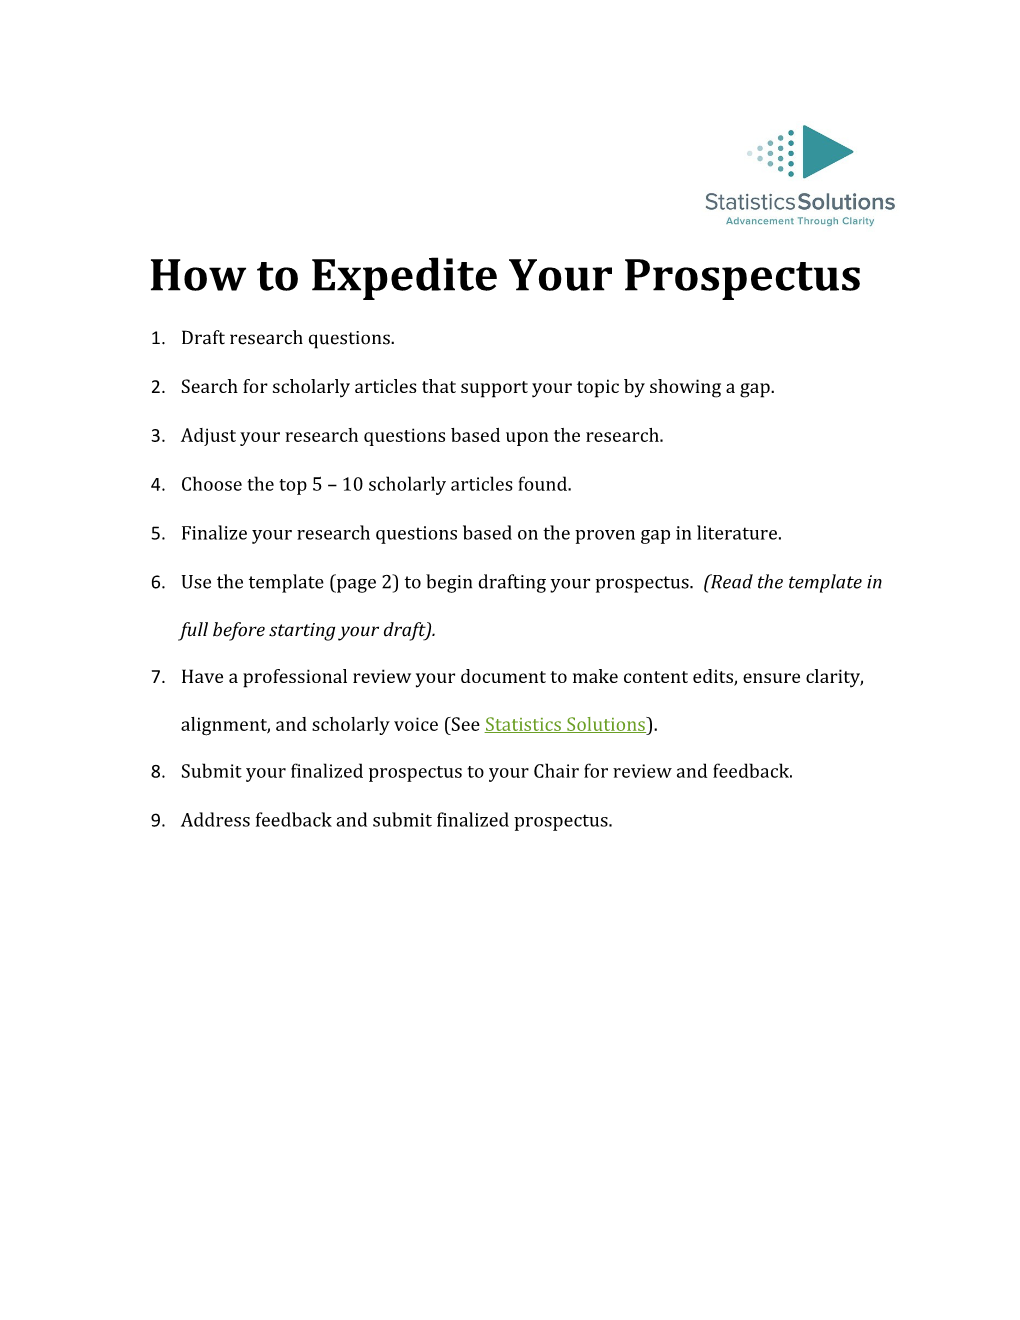 How to Expedite Your Prospectus